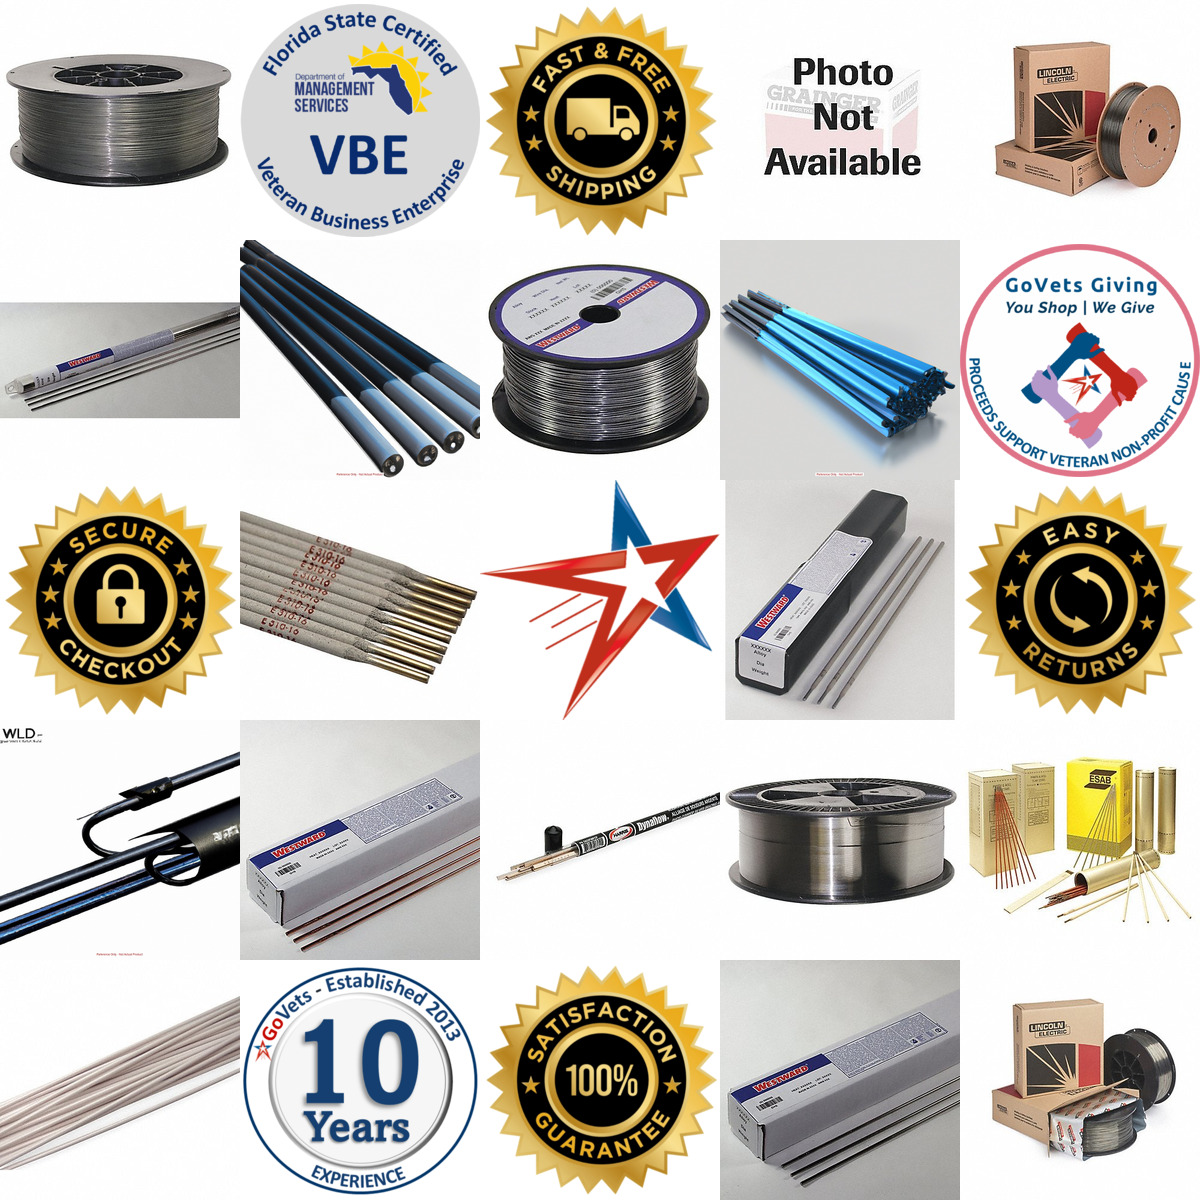 A selection of Filler Metals products on GoVets